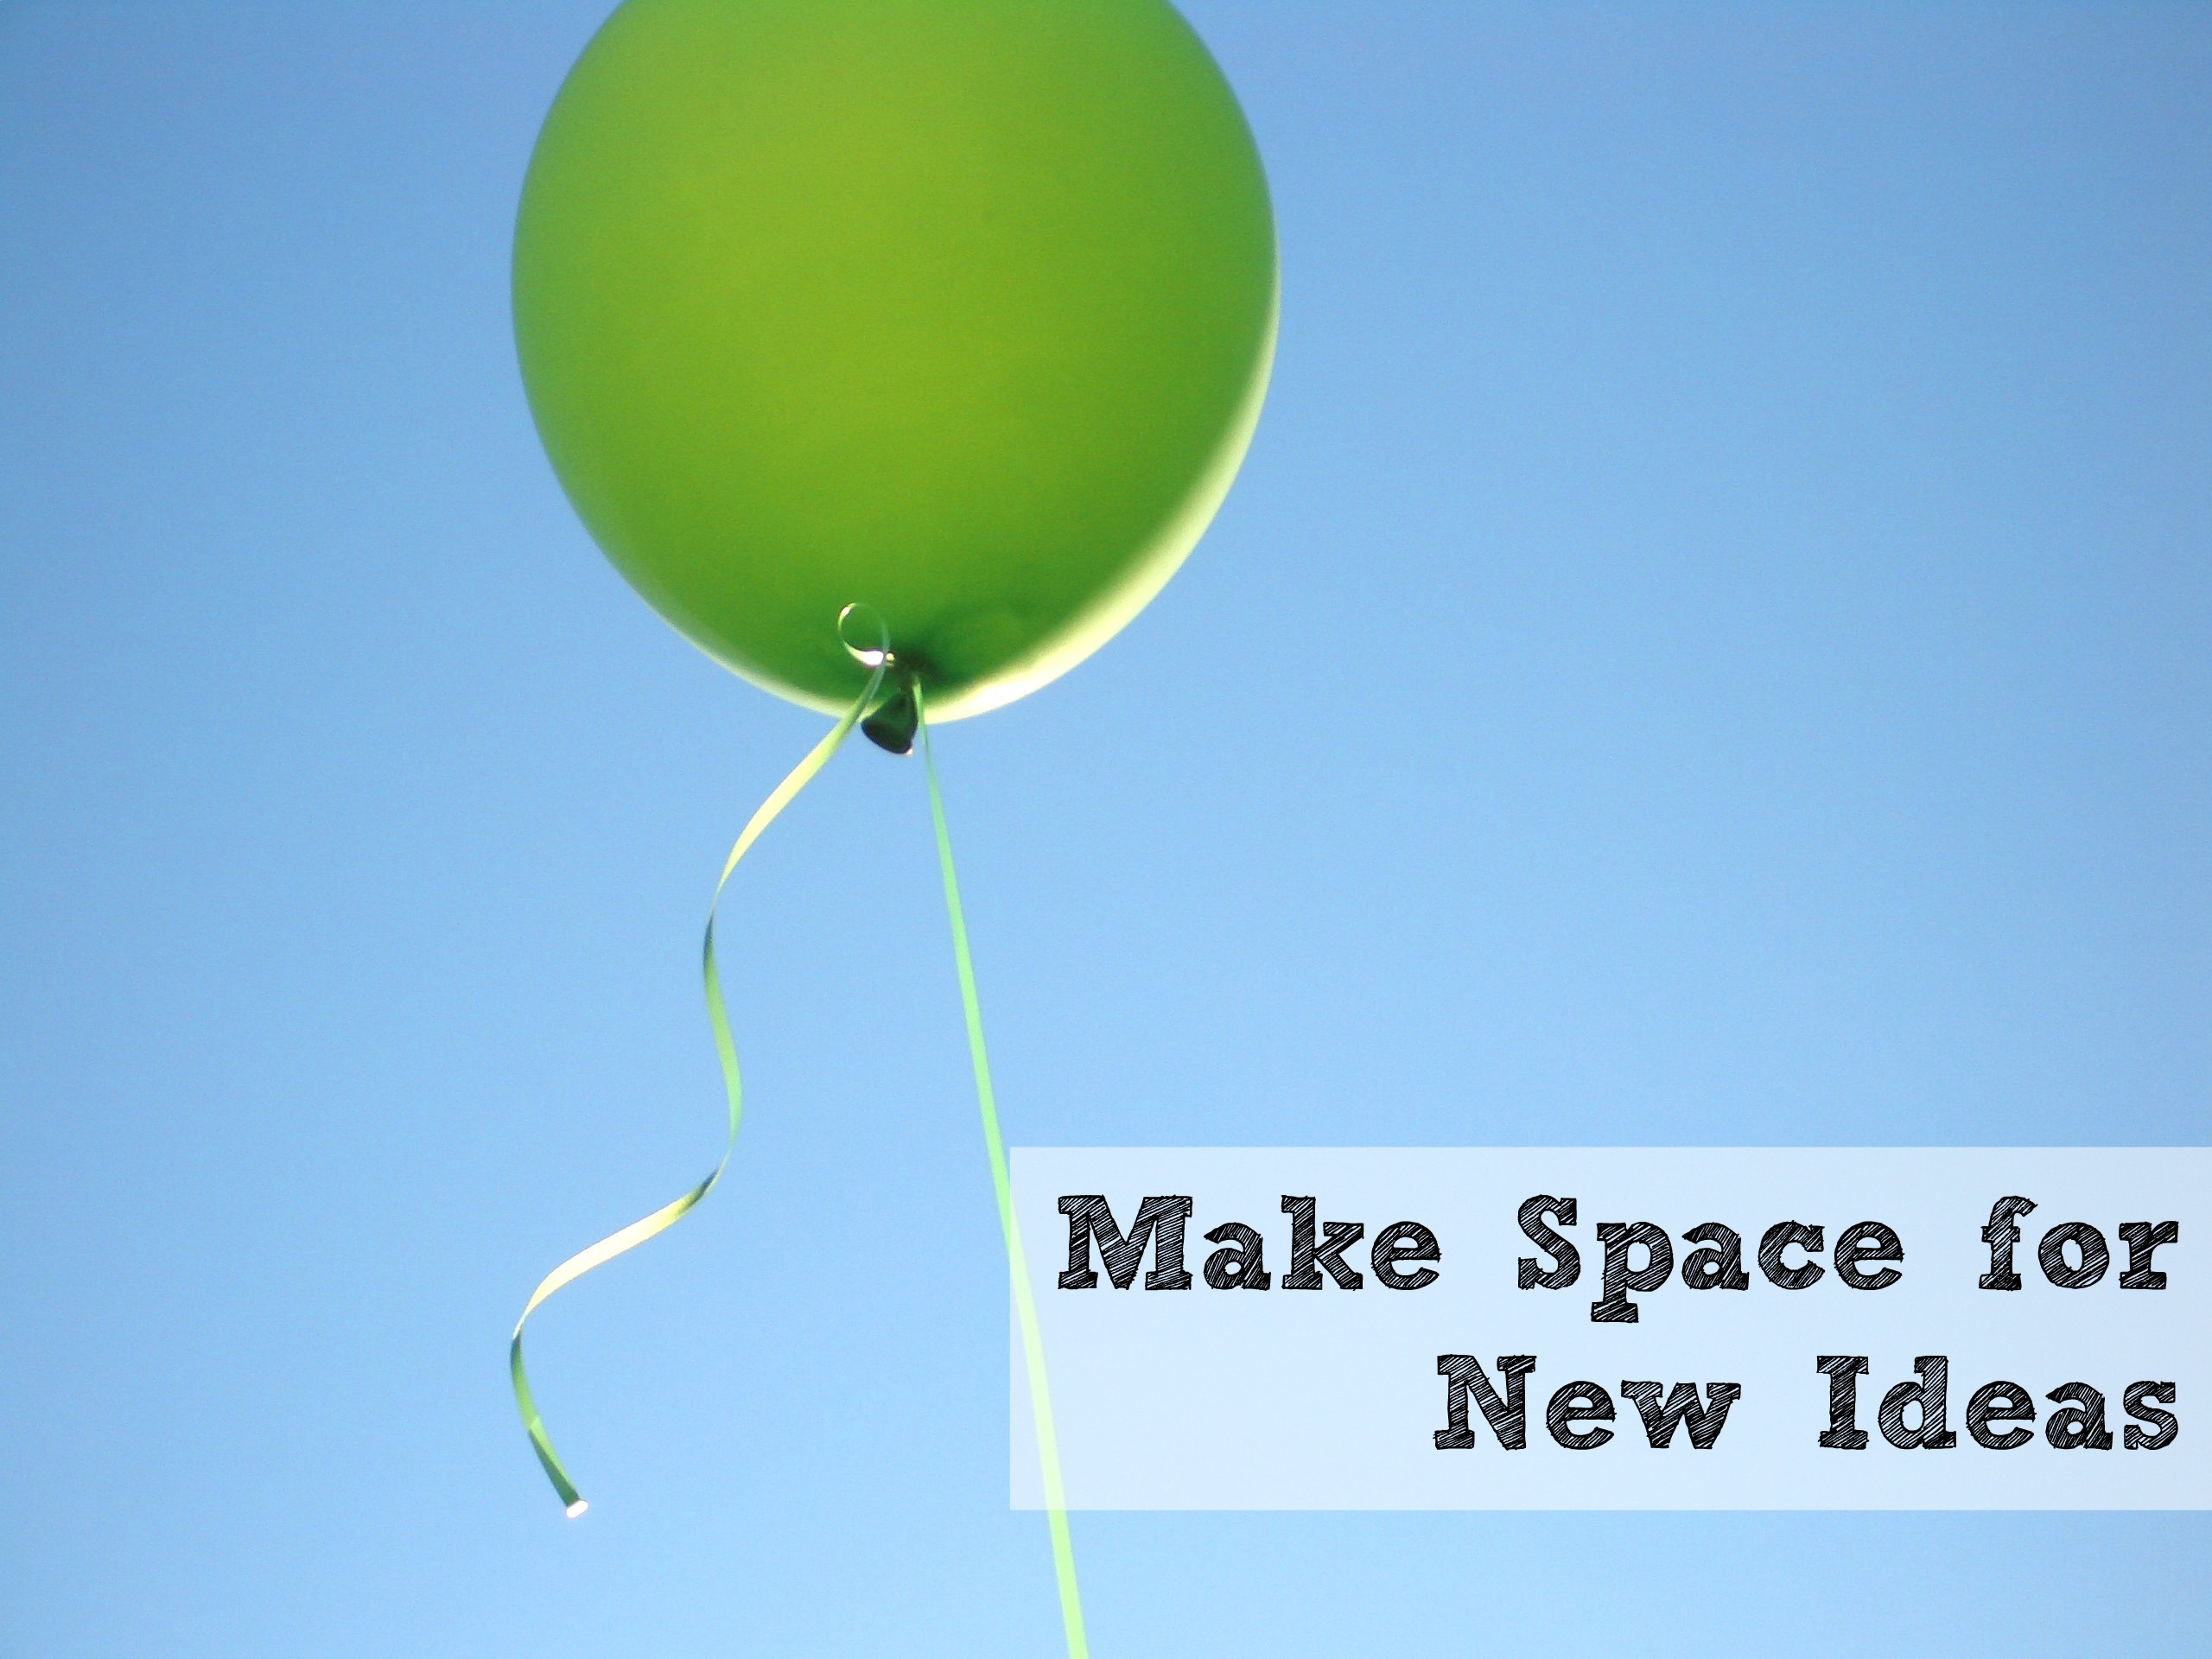 How to make space for new ideas